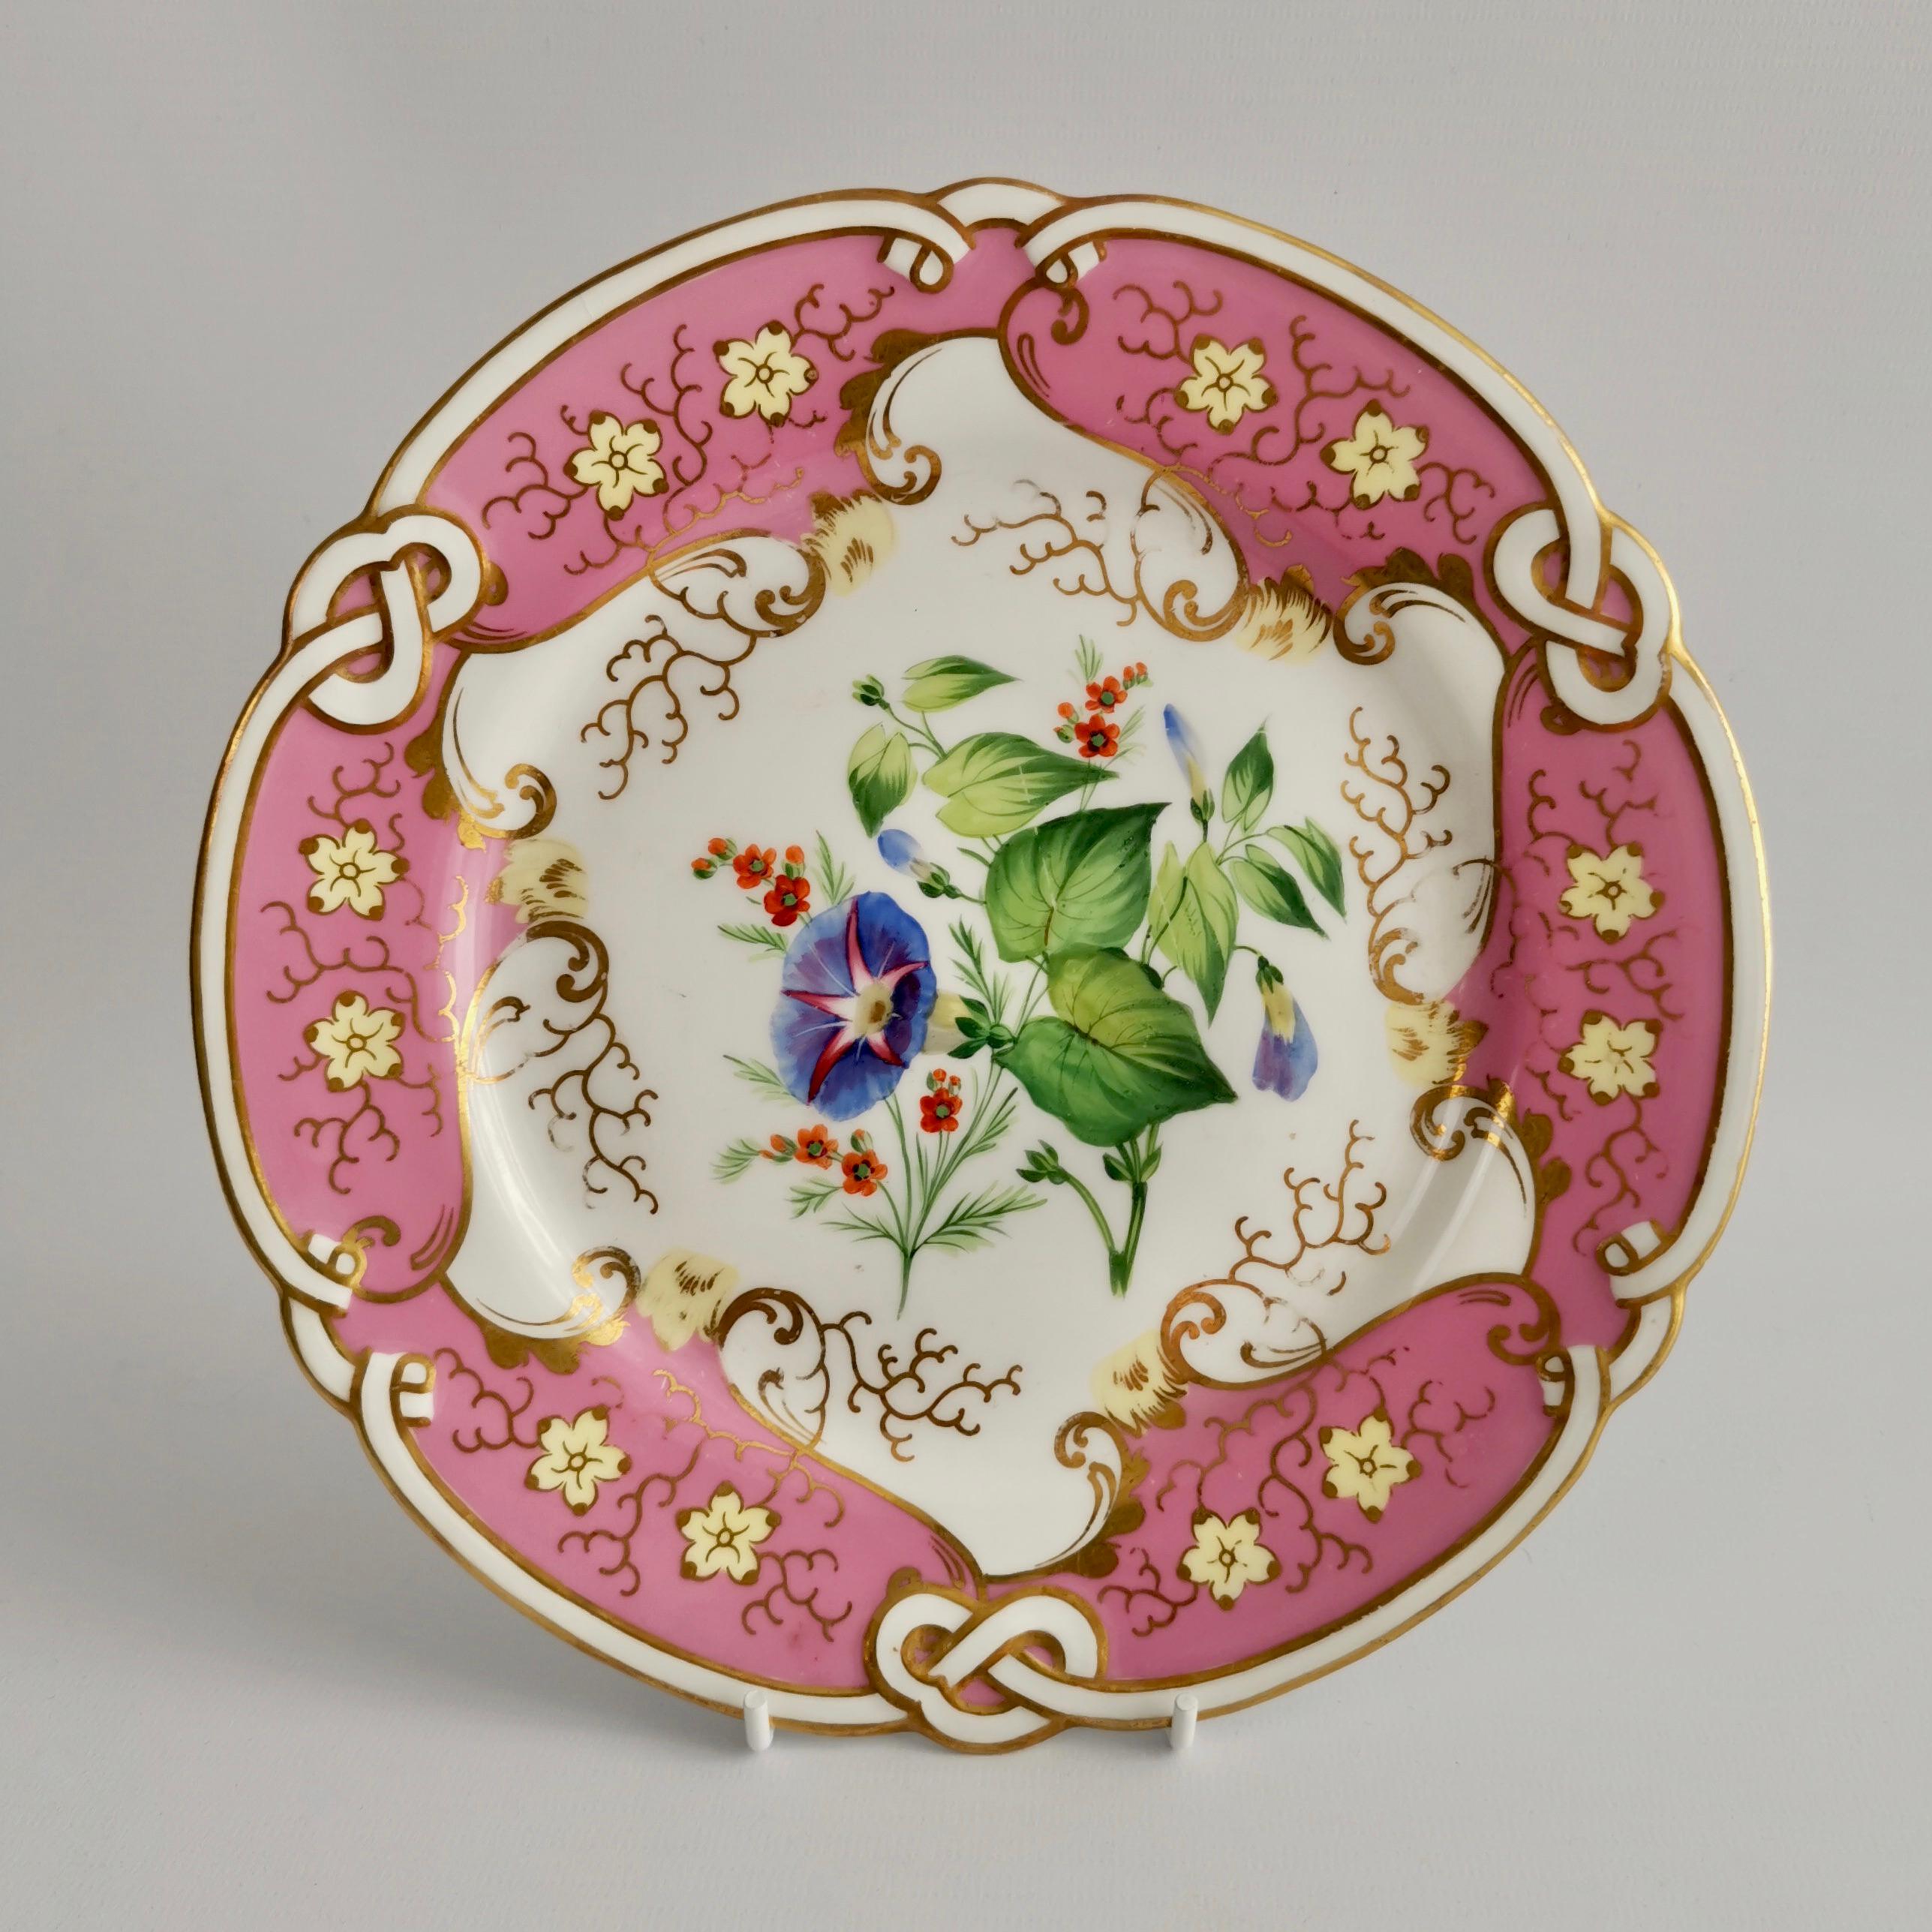 Hand-Painted Samuel Alcock Small Porcelain Dessert Set, Pink with Flowers, Victorian 1854